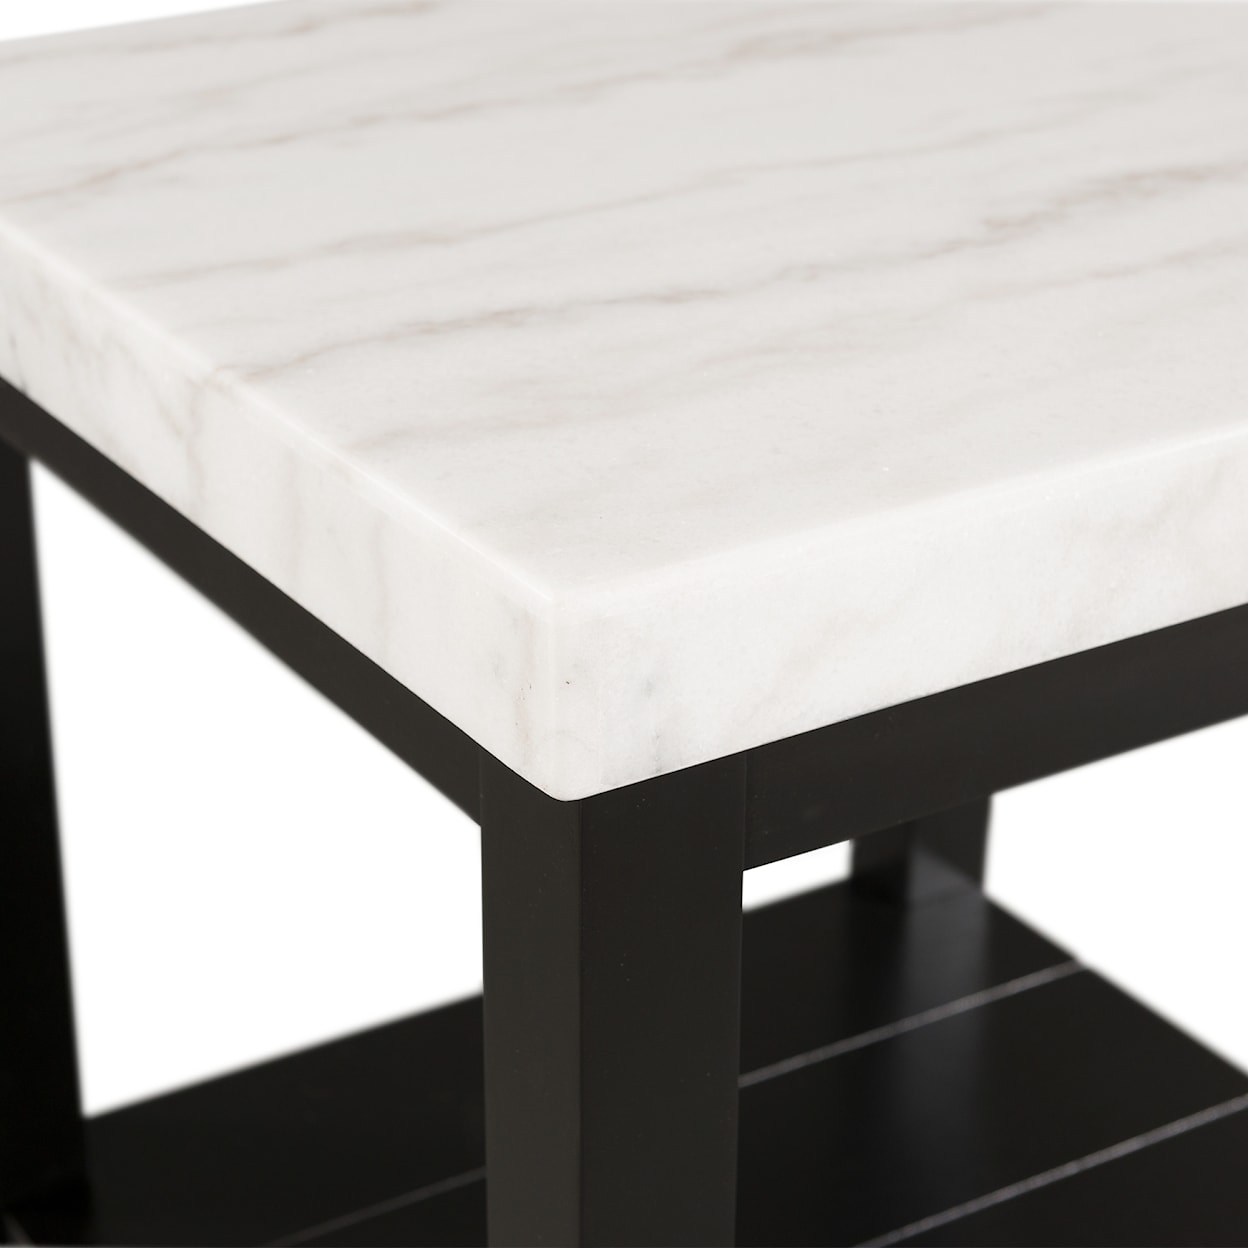 Elements International Marky MARKY END TABLE |